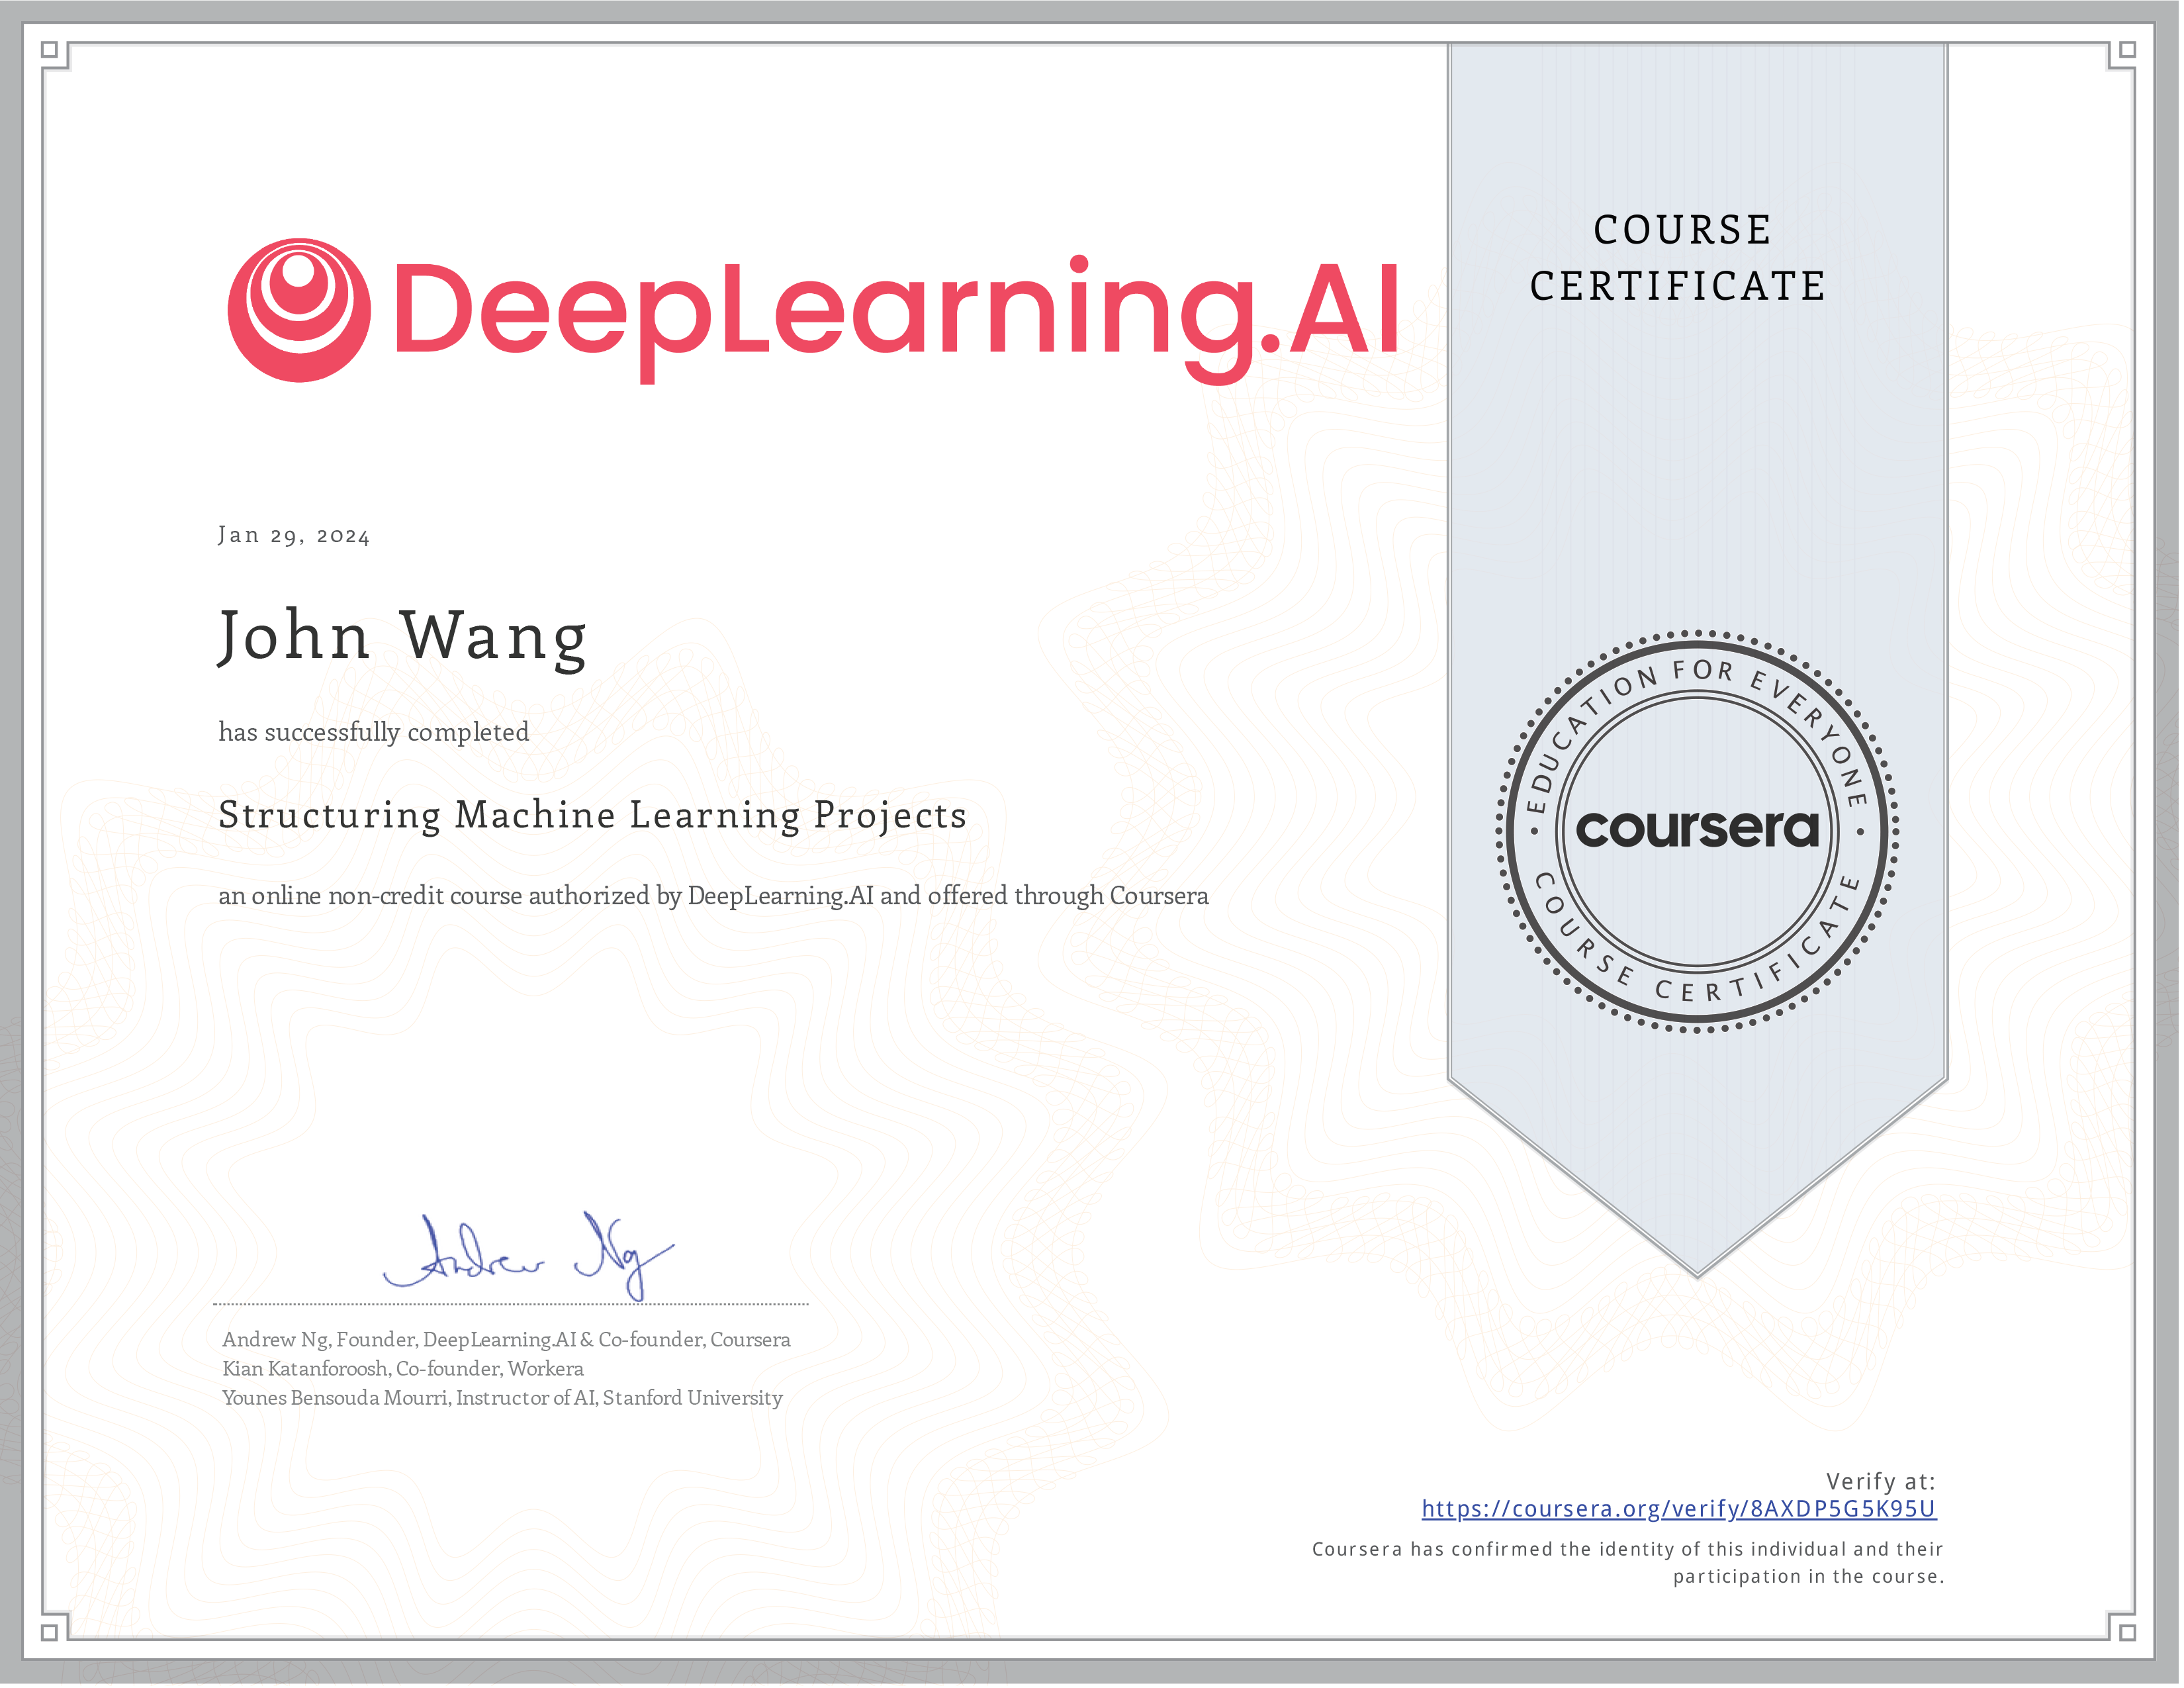 John's Structuring Machine Learning Projects from DeepLearning.AI by Andrew Ng